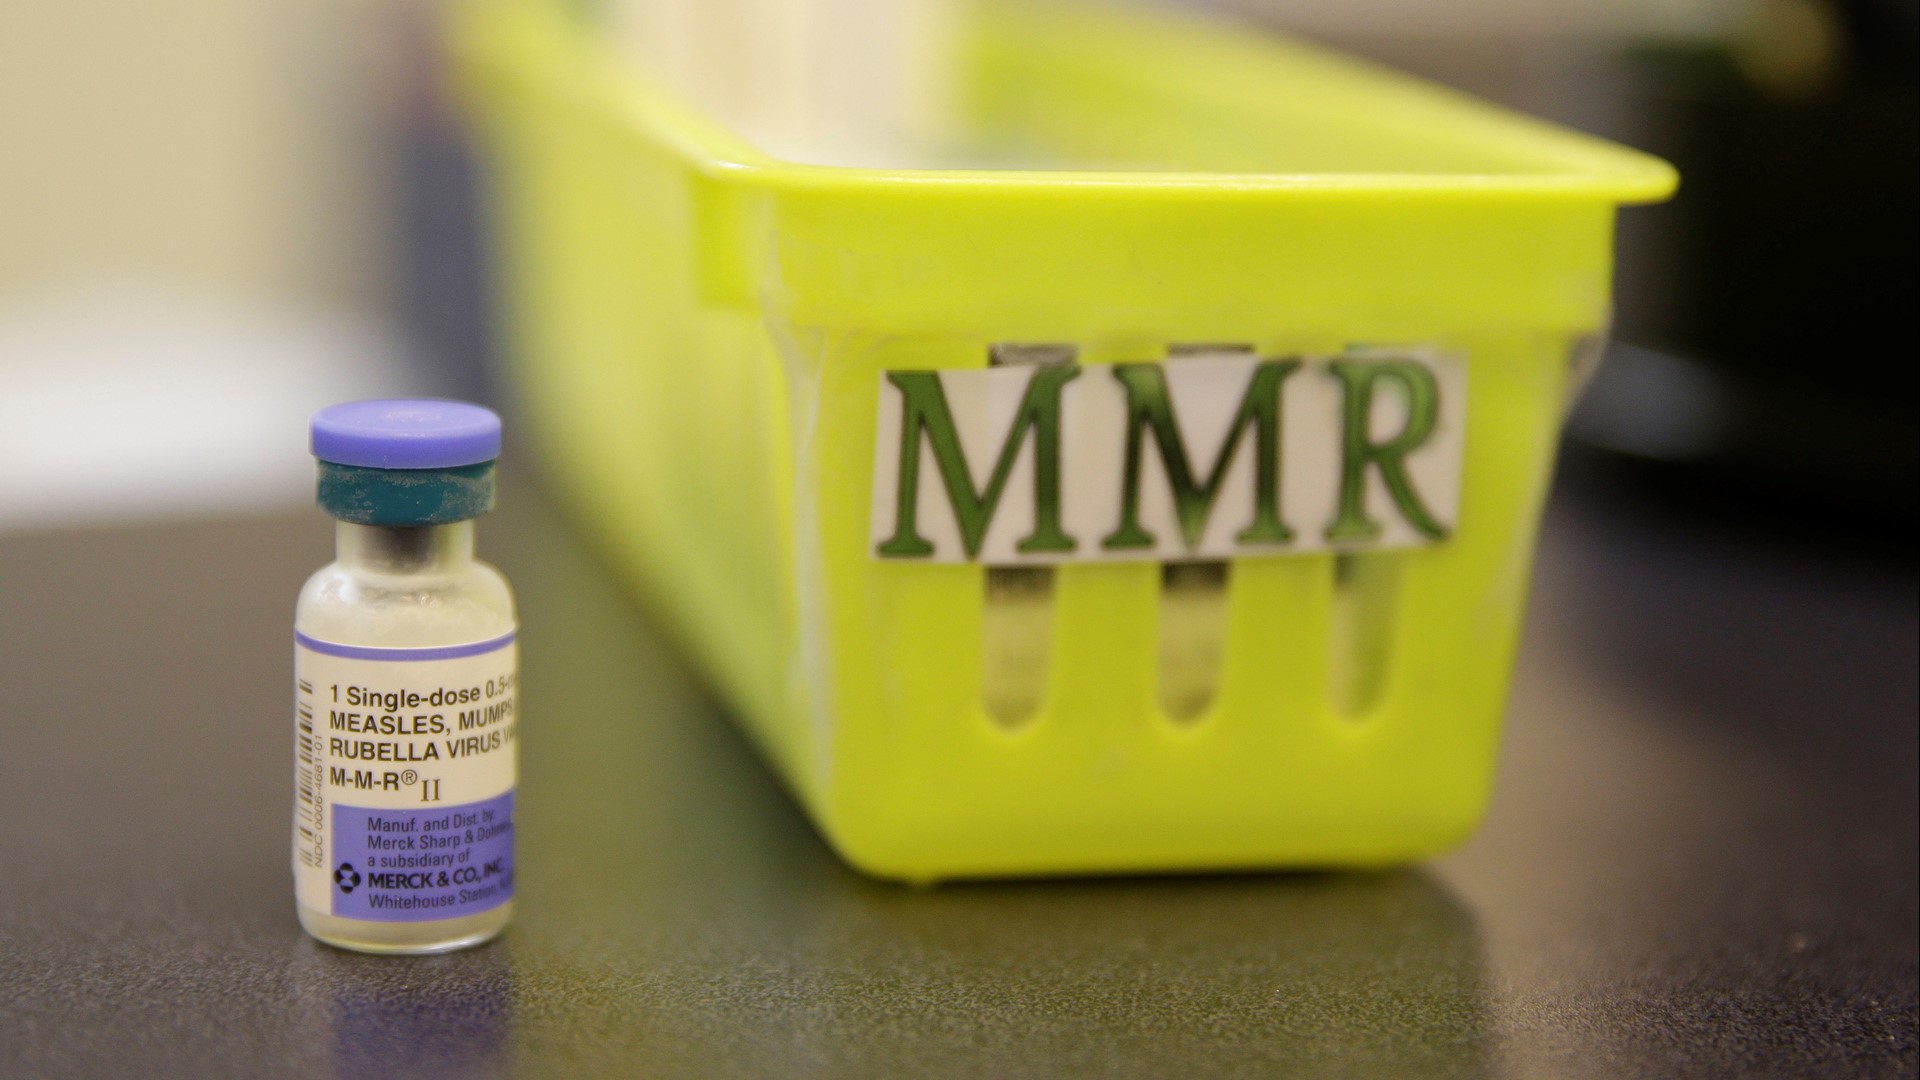 You may have heard about this story today: An unvaccinated child in Calaveras County was diagnosed with measles, according to the county health department. But why are we starting to hear more and more about the measles virus? Let’s connect the dots…